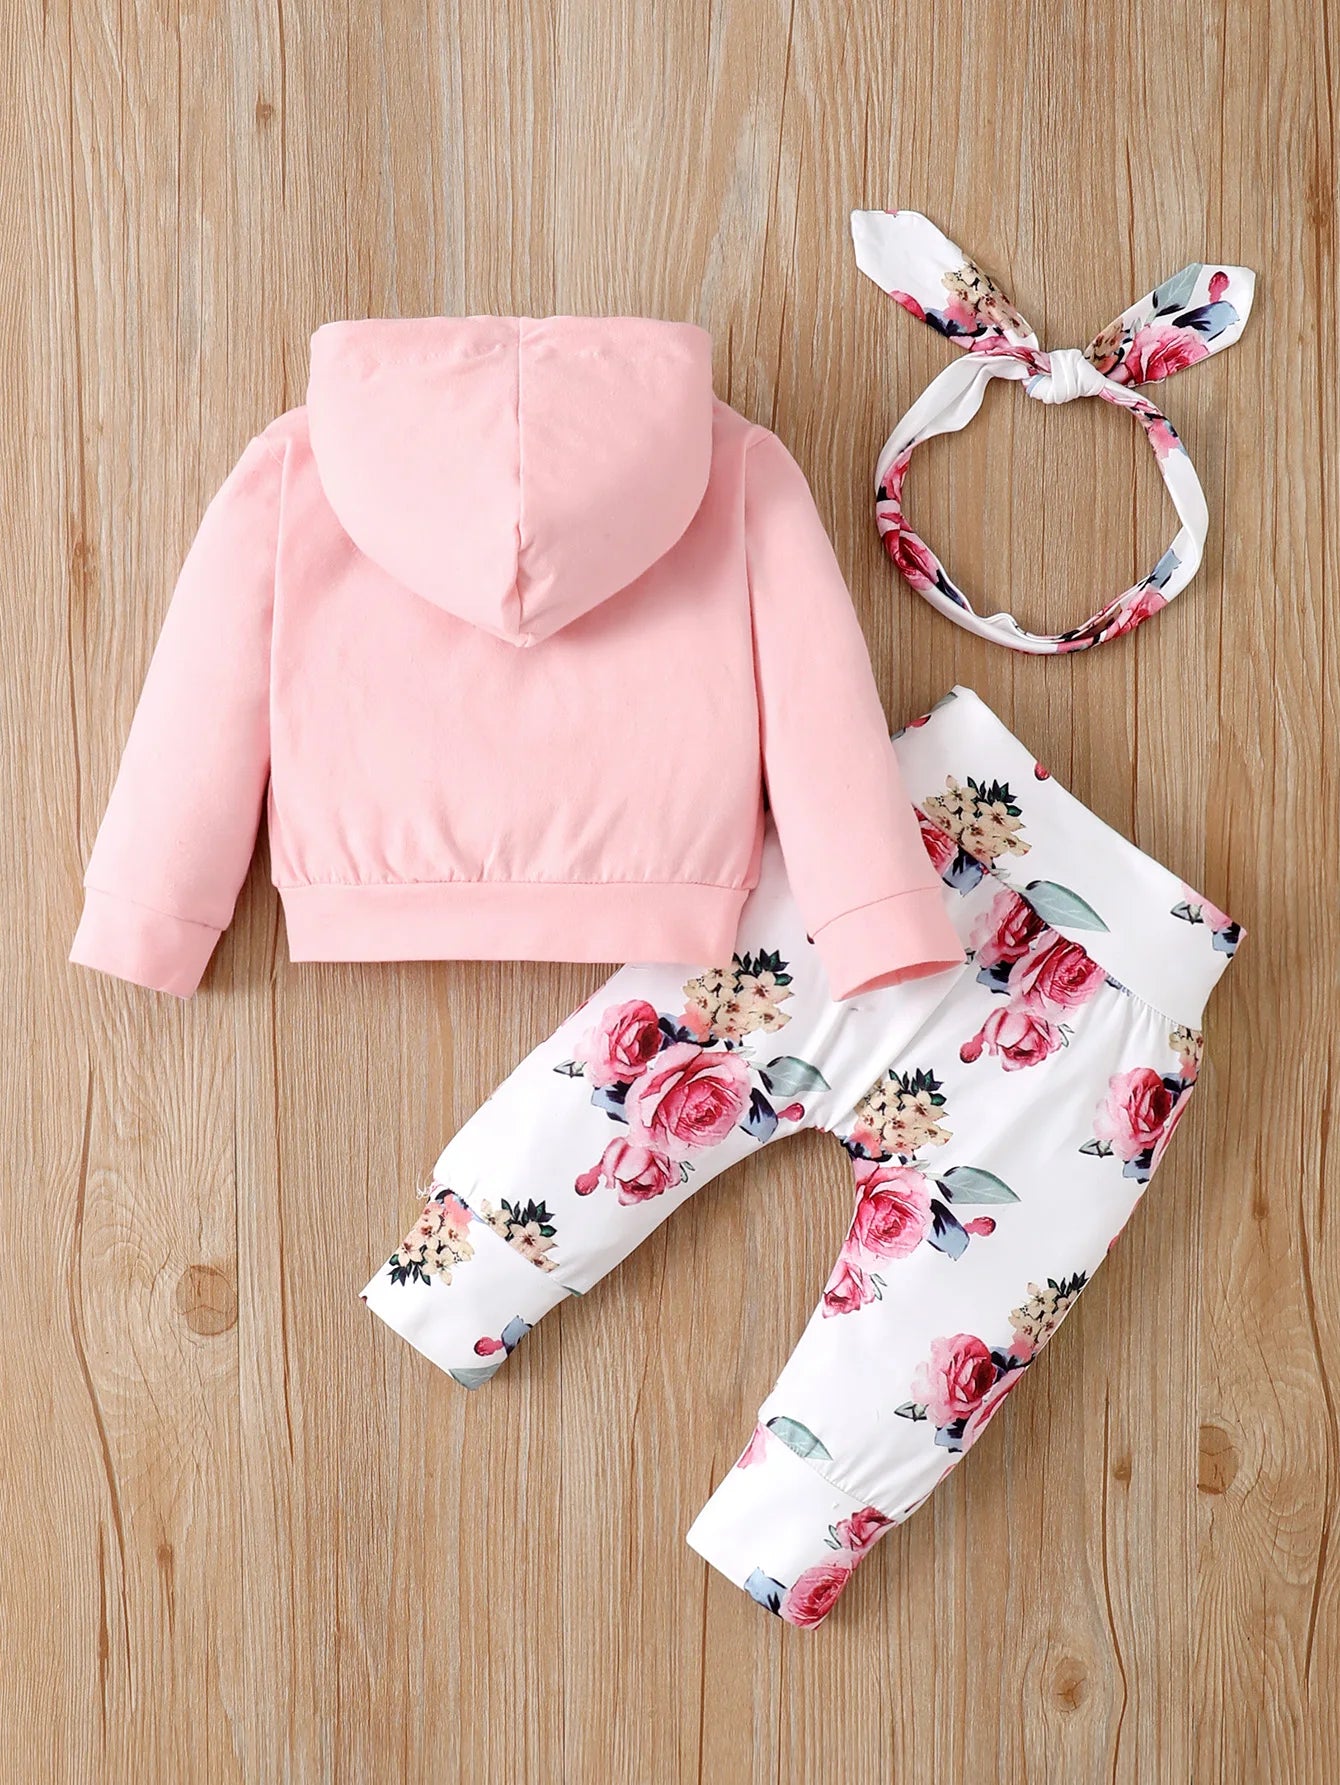 Months Newborn Baby Girl Floral Clothes Set Hooded Printed Top + Pant